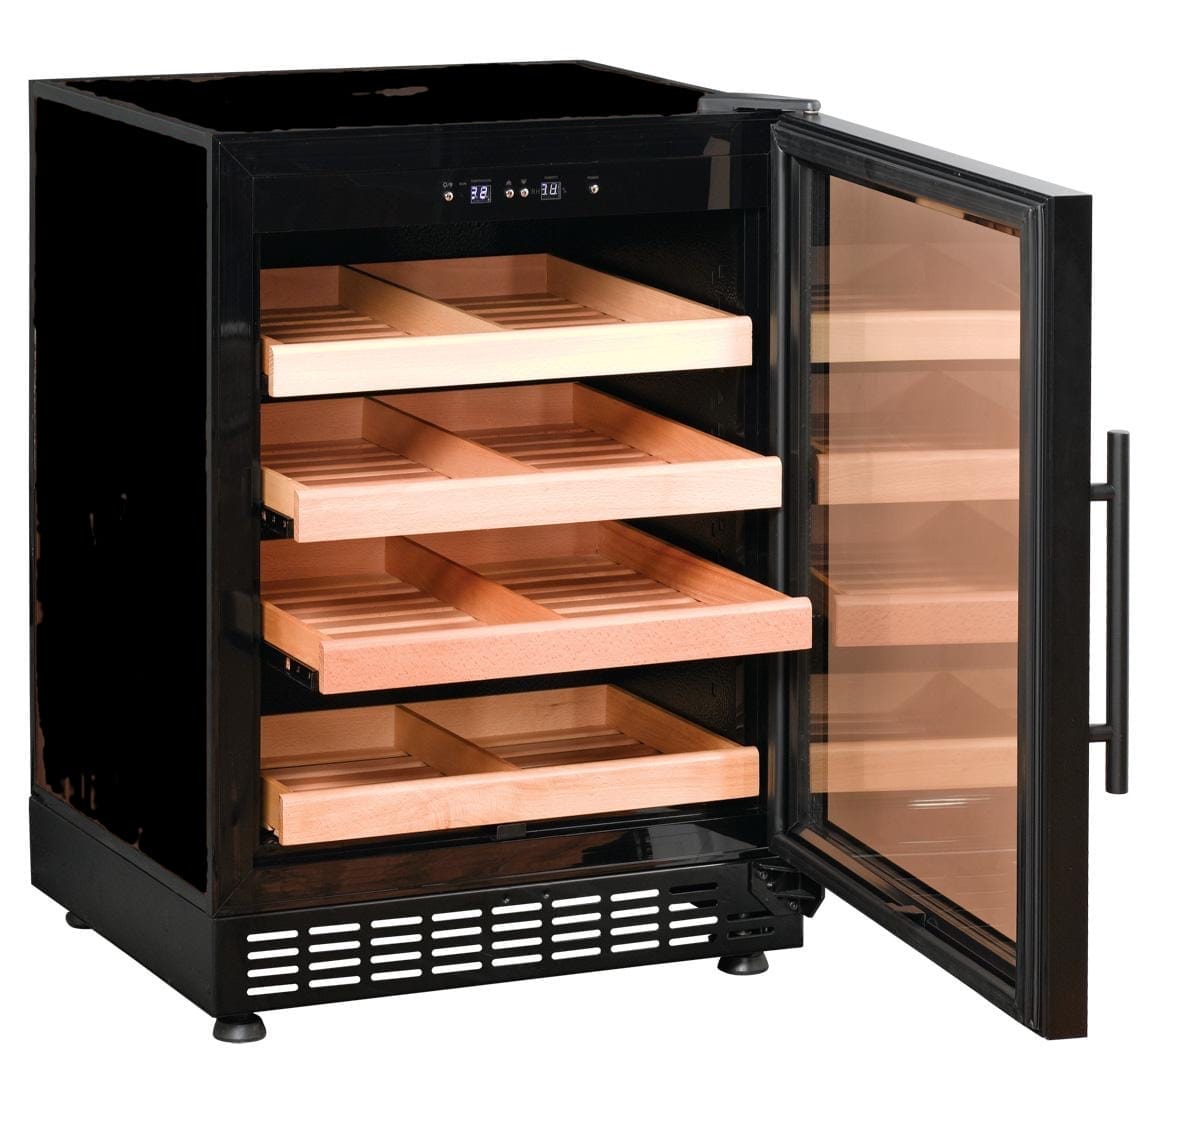 A black wine cooler with an open glass door showing four wooden shelves, against a white background.